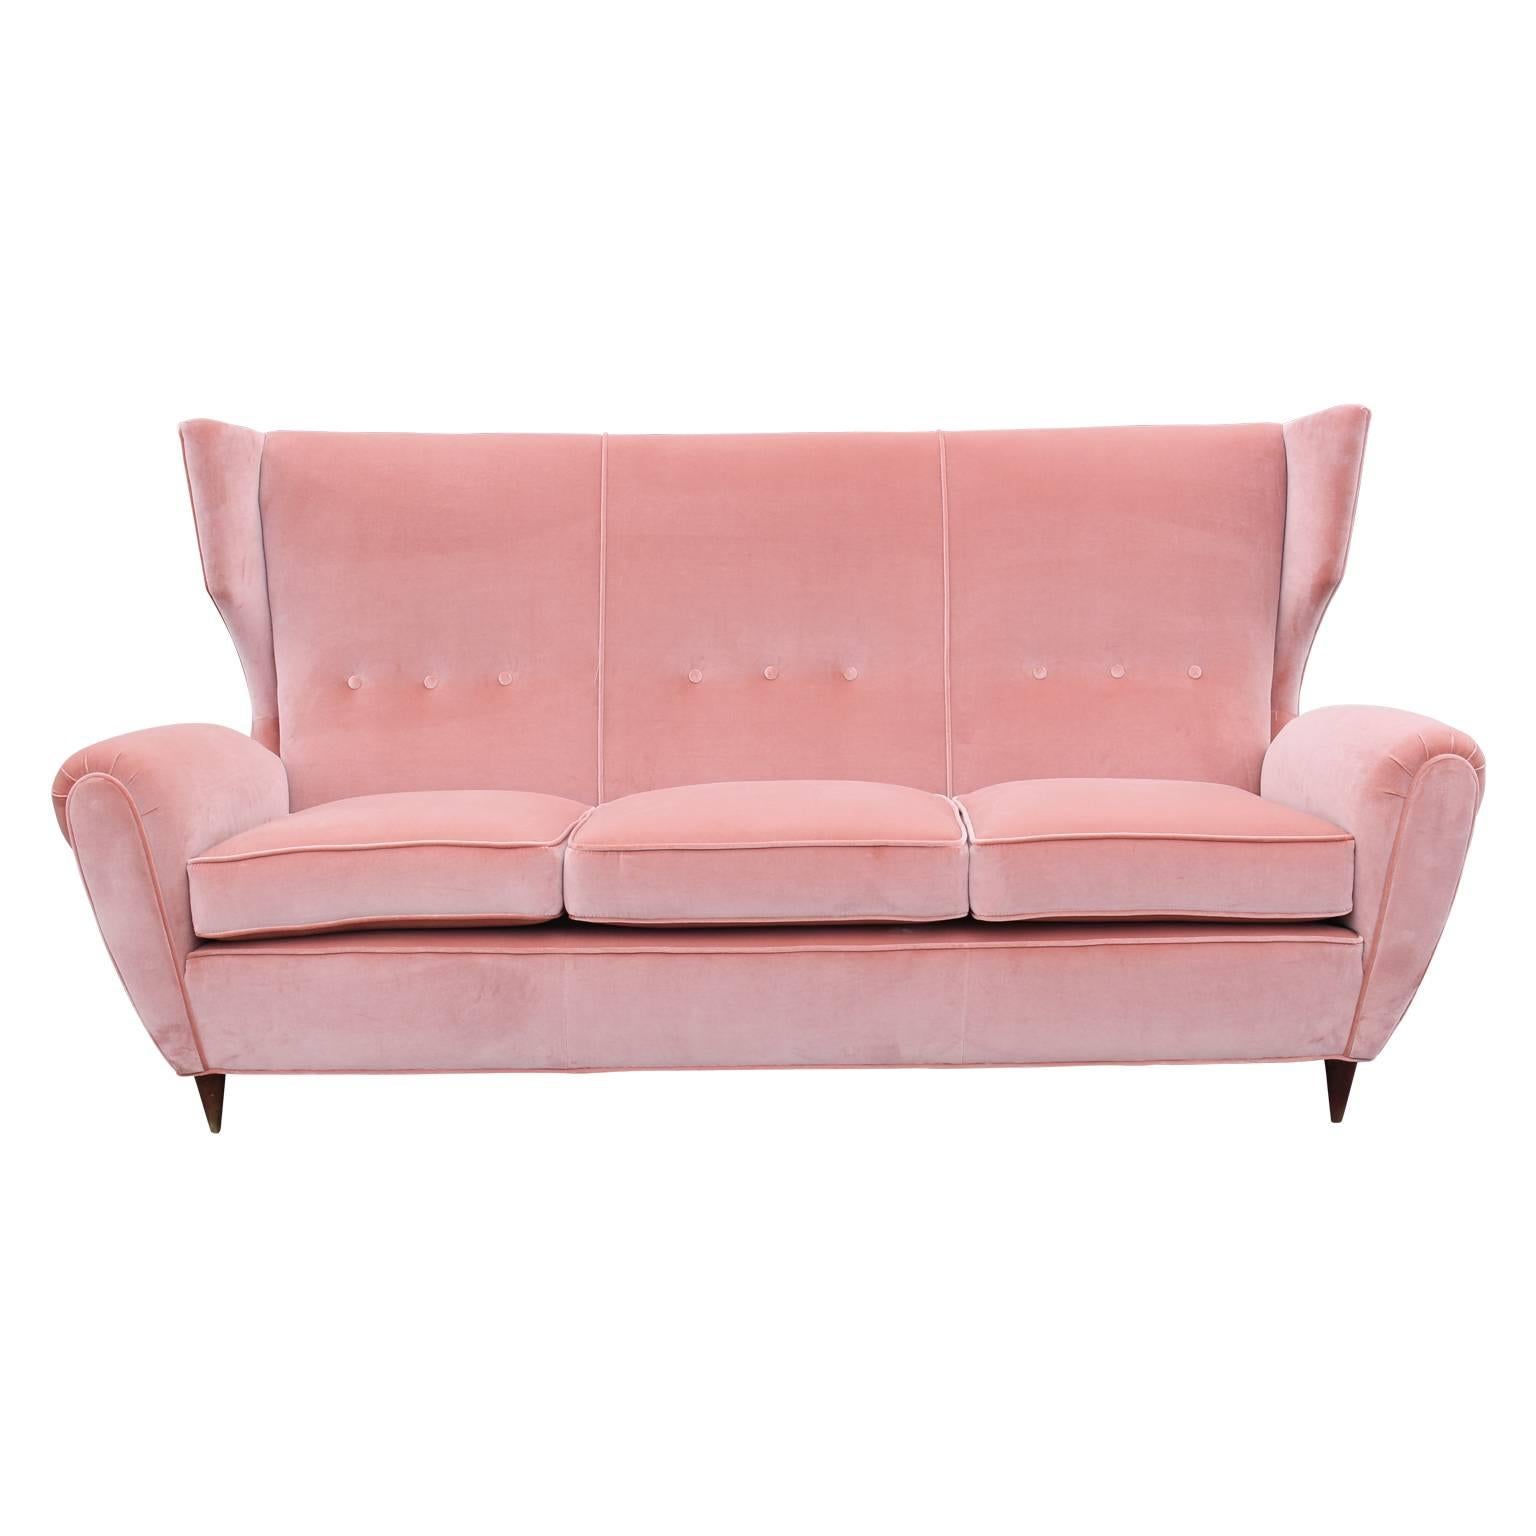 Gorgeous modern Italian wingback couch recently recovered in a lush light pink Kravet velvet with small tapered walnut legs. This three-seat would be a great statement piece and perfect for entertaining or in the entrance of any building!
 